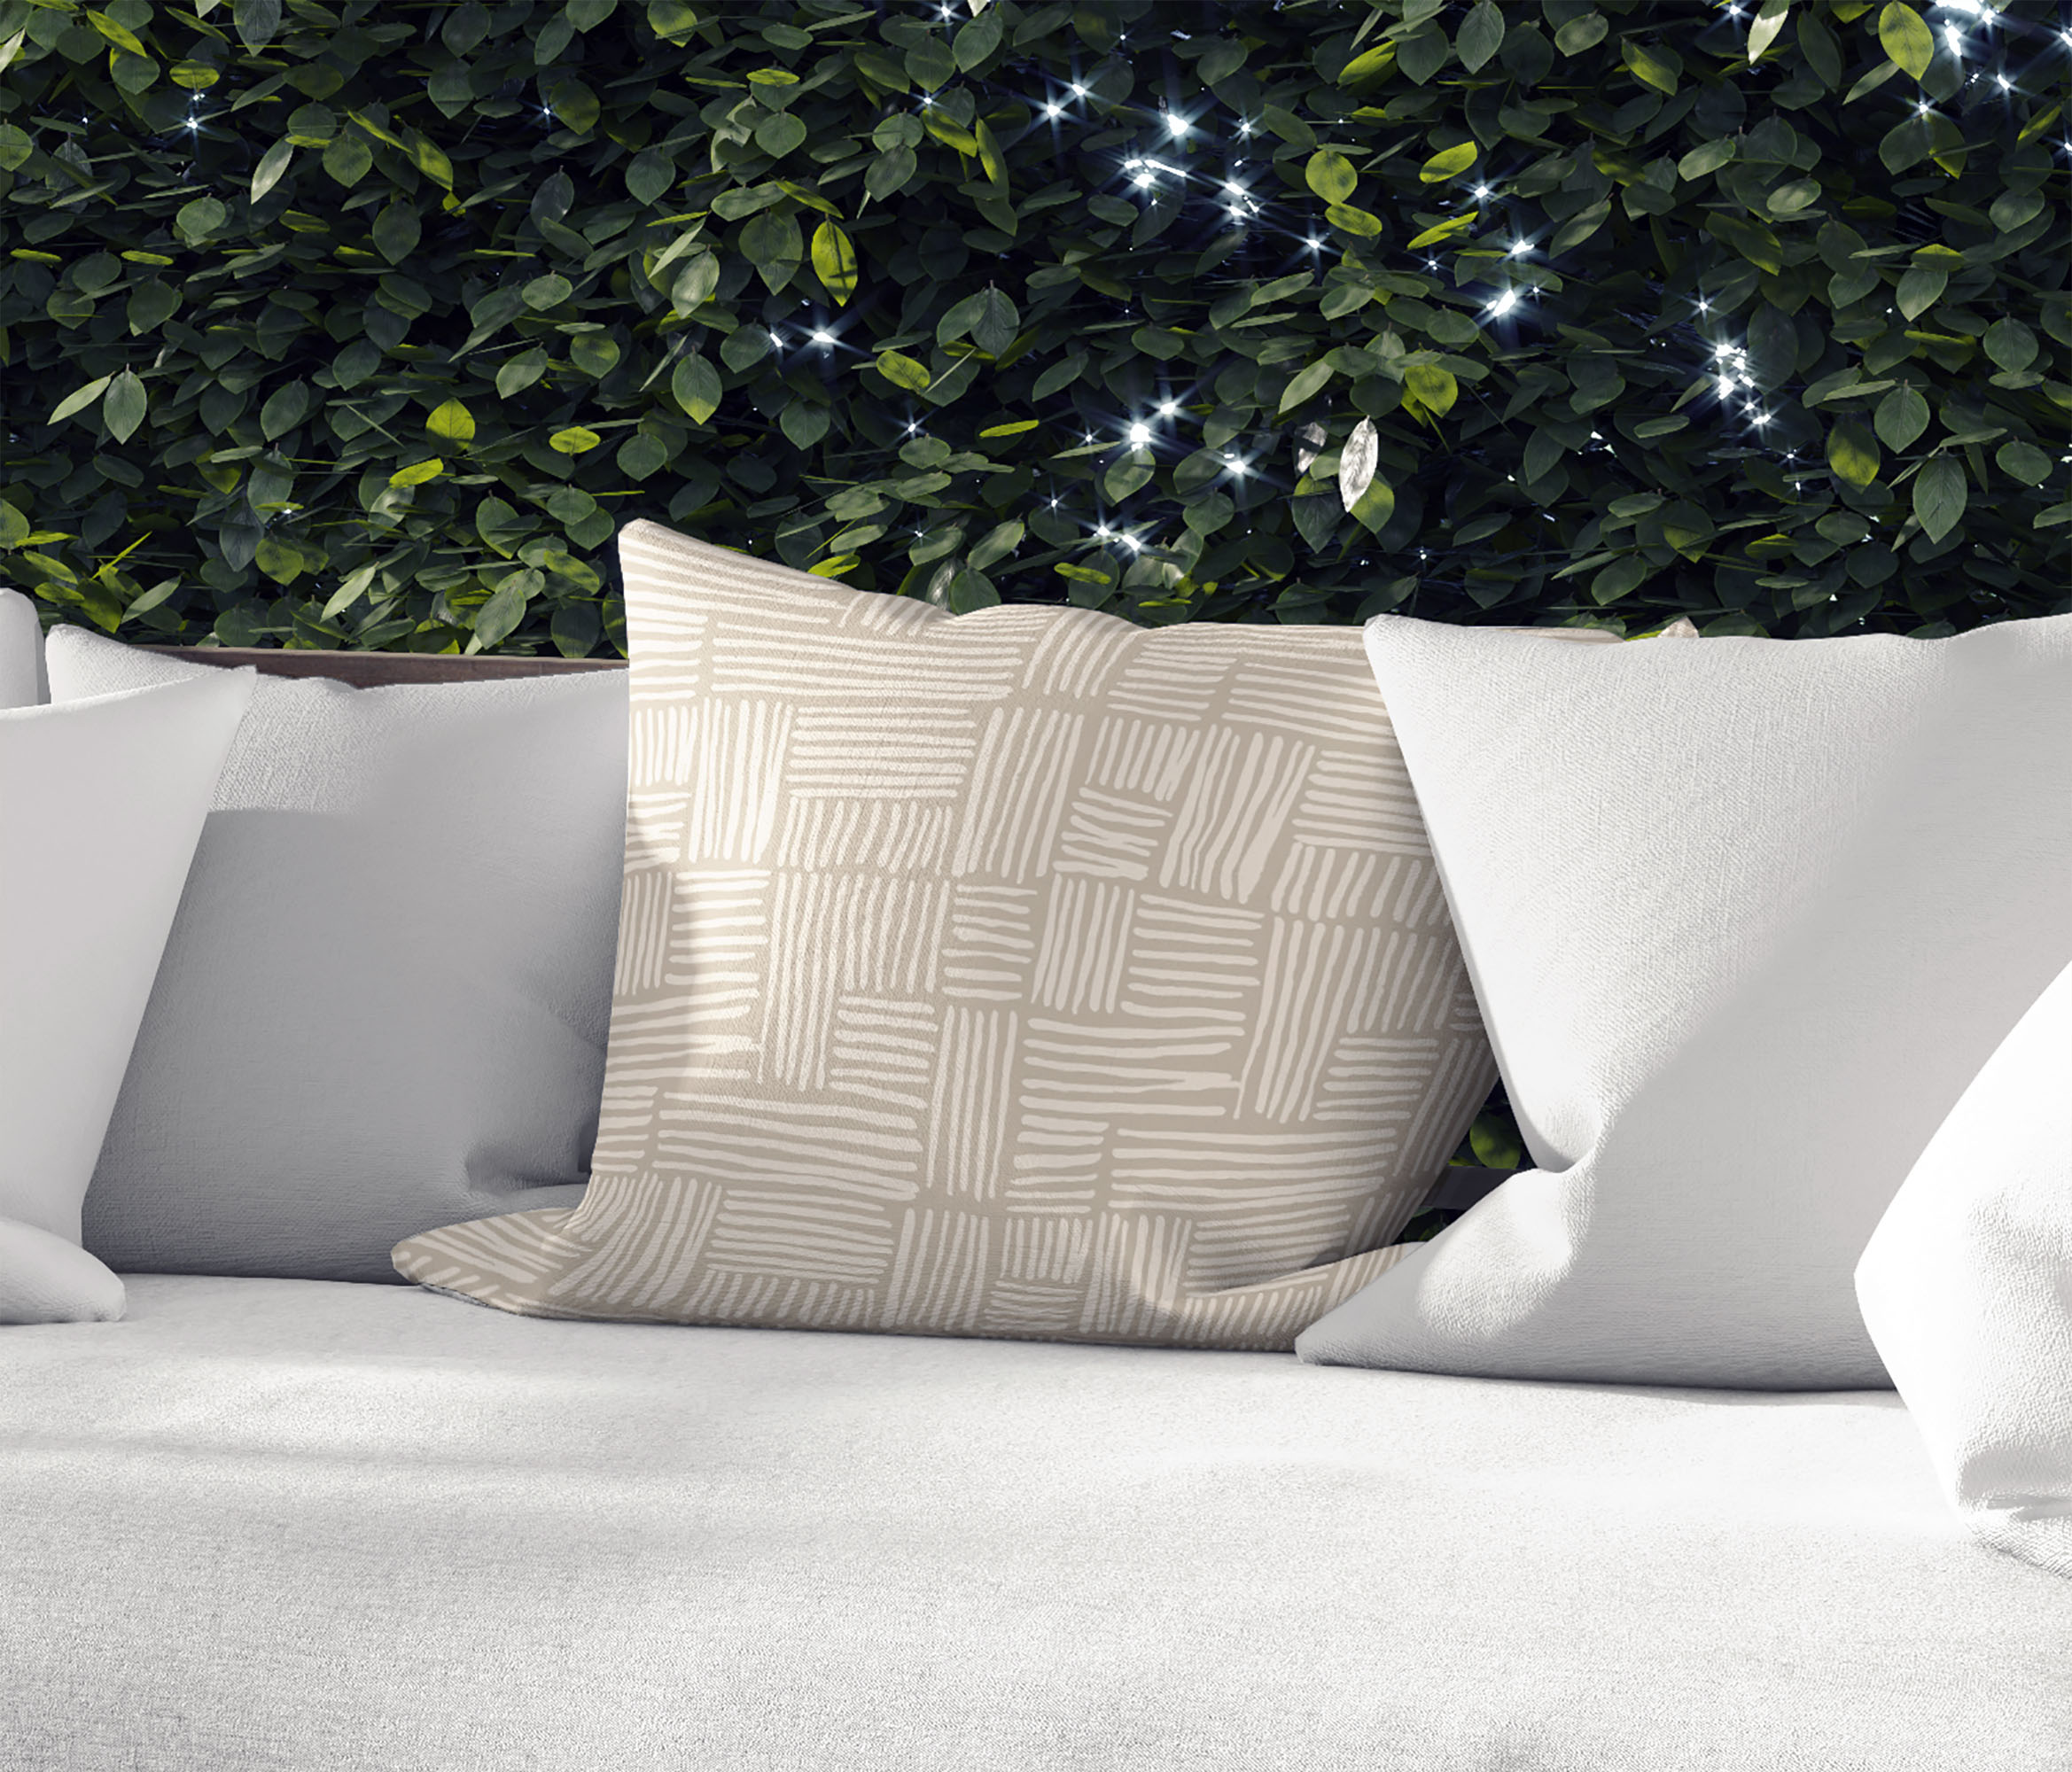 Rails Beige Outdoor Pillow by Kavka Designs - image 5 of 5